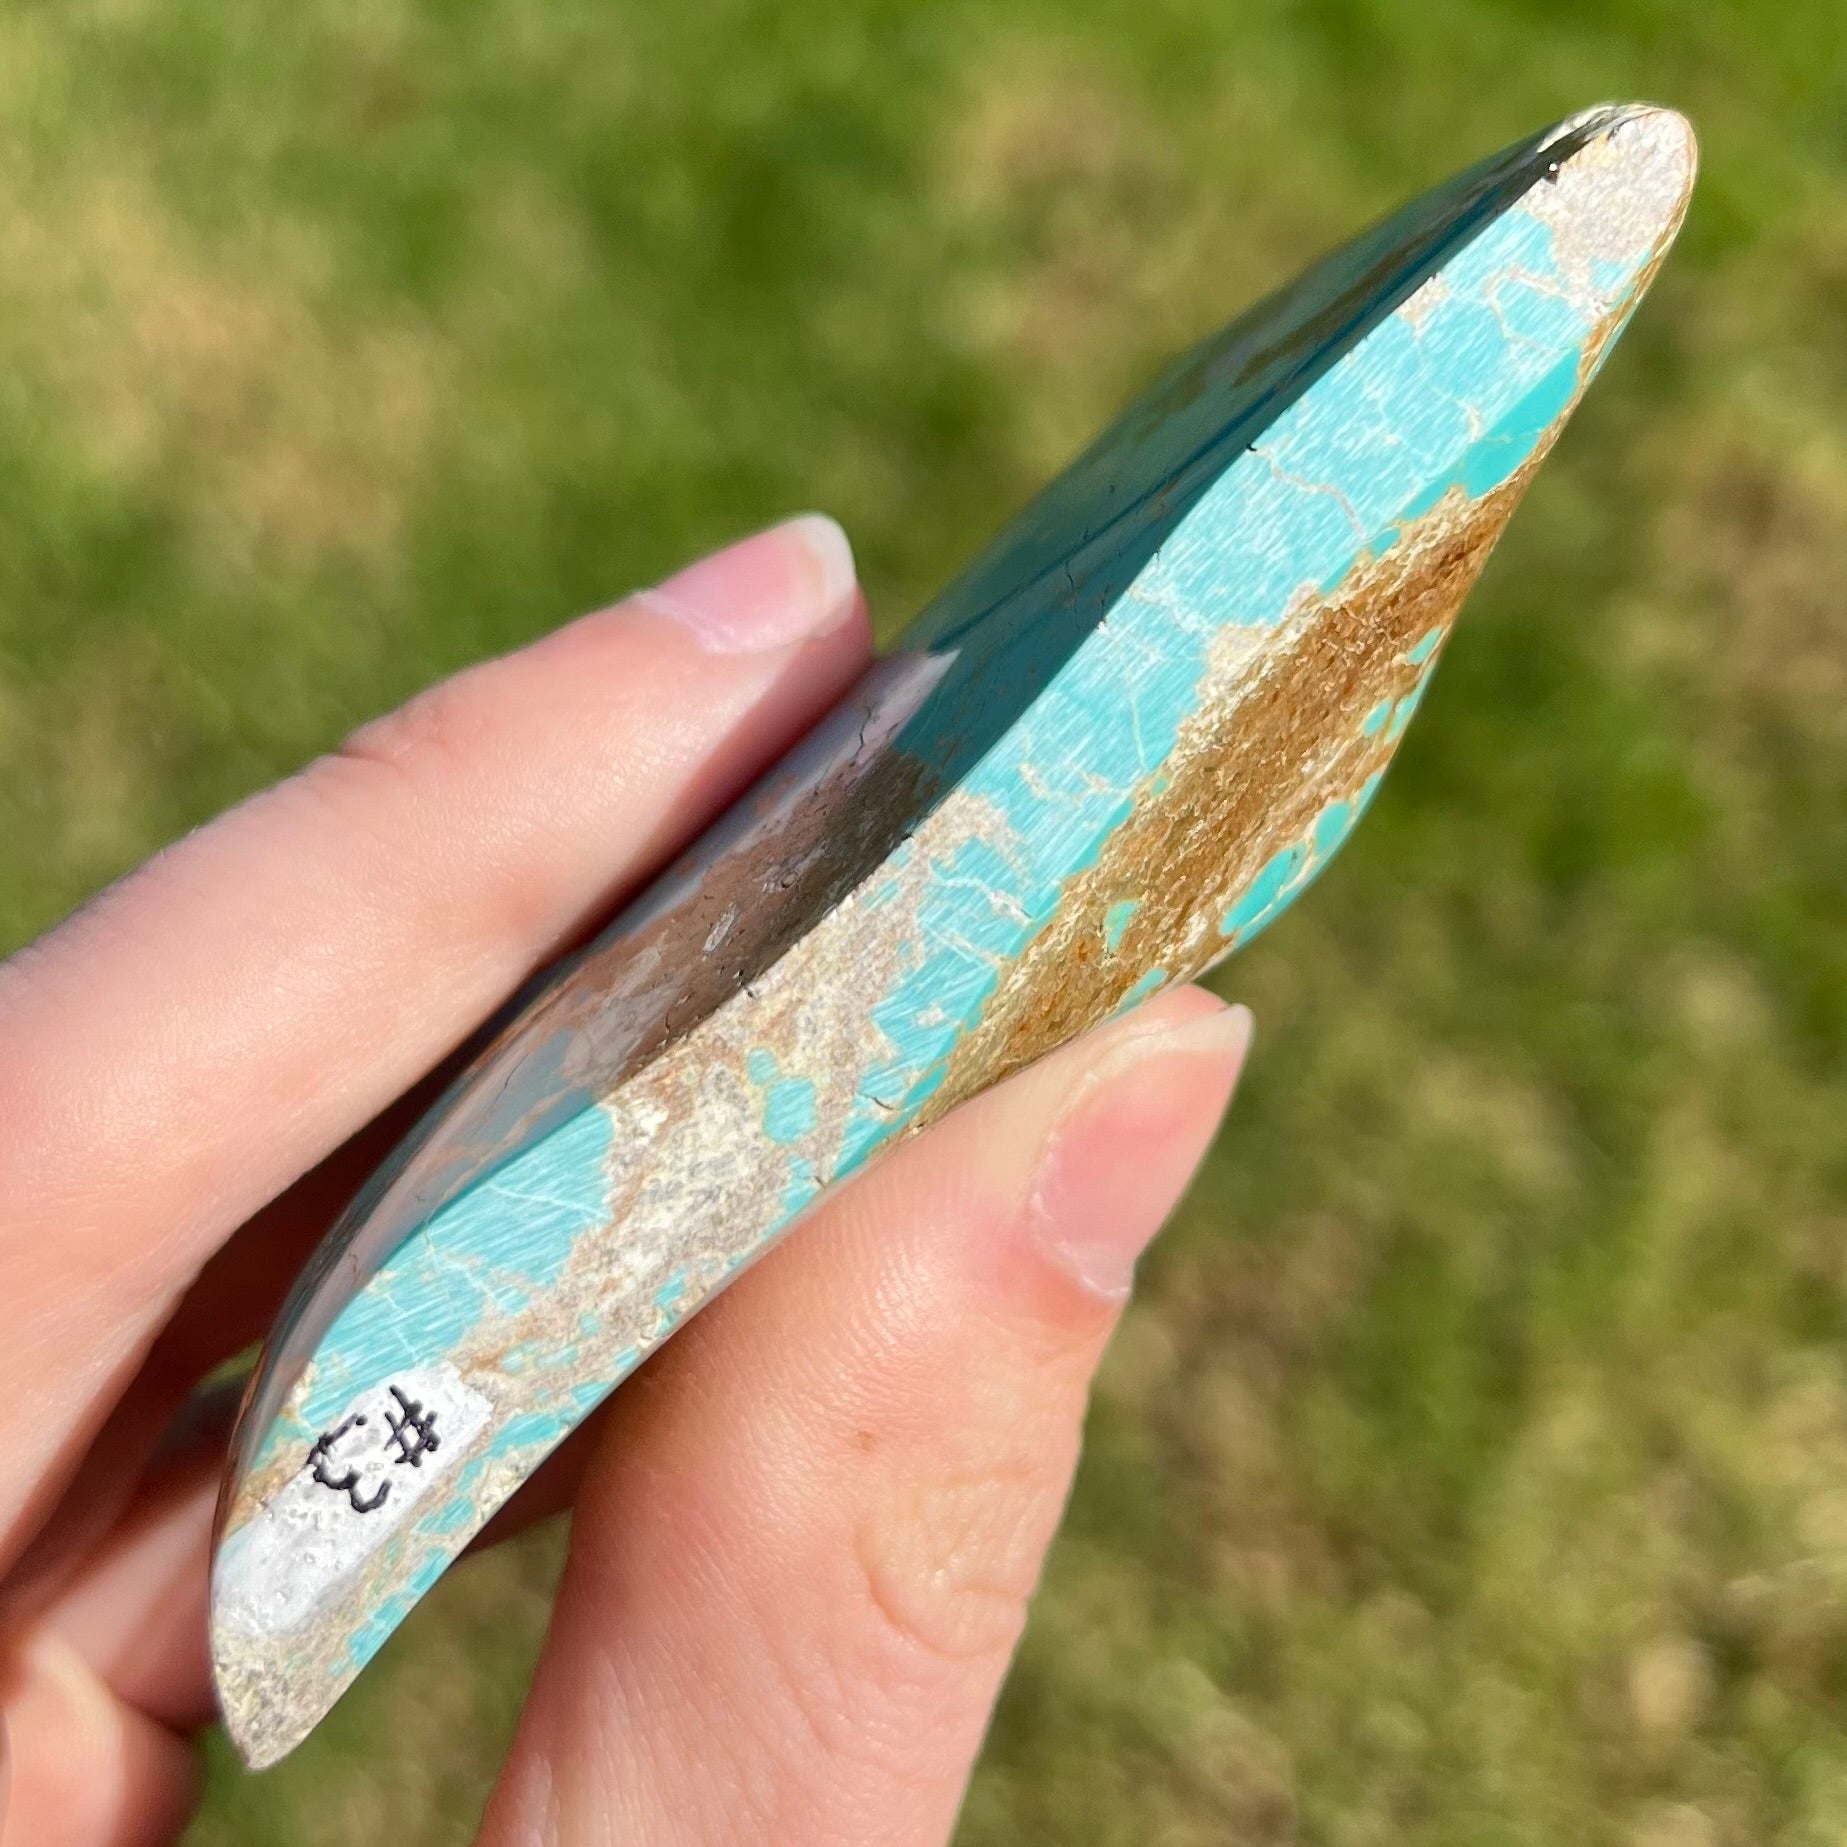 A large, polished turquoise specimen from the Cripple Creek mine.